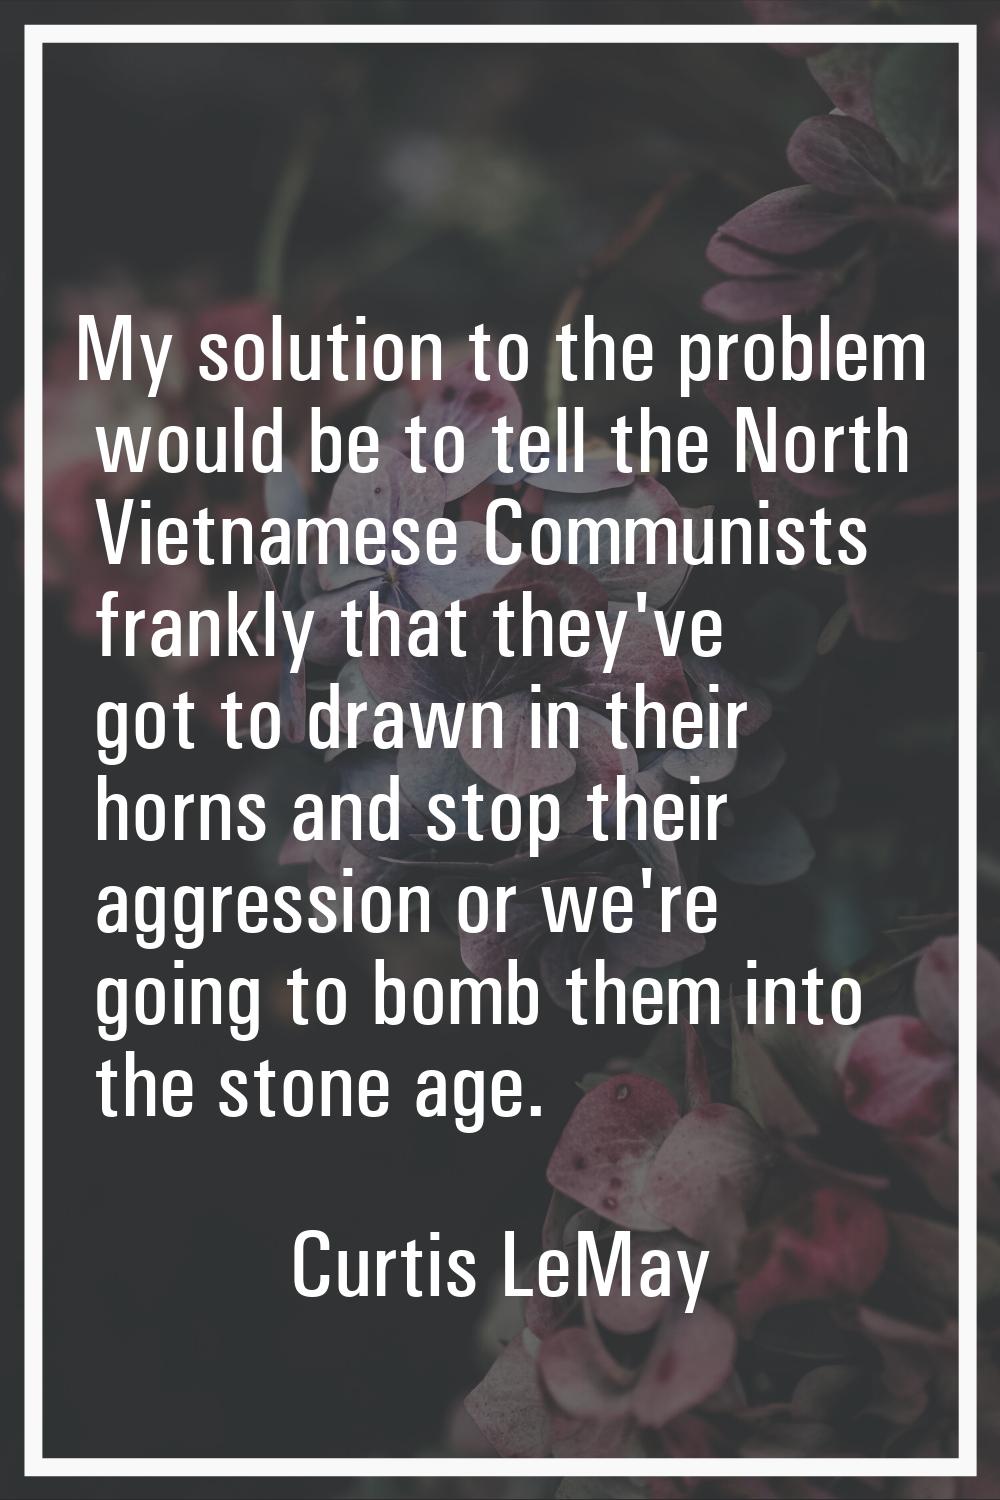 My solution to the problem would be to tell the North Vietnamese Communists frankly that they've go